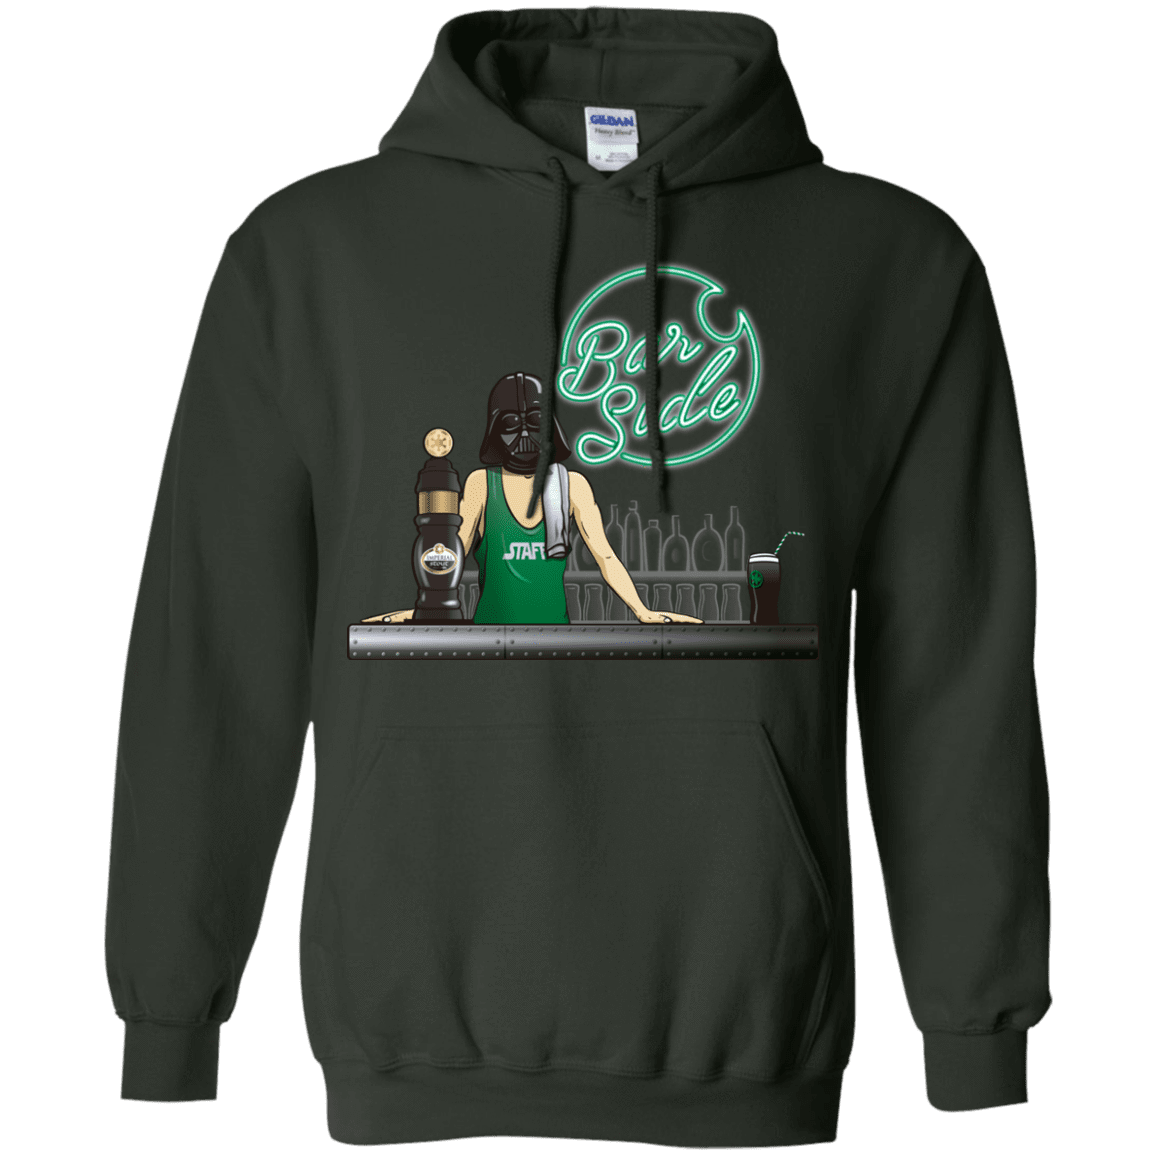 Sweatshirts Forest Green / Small Bar side Pullover Hoodie